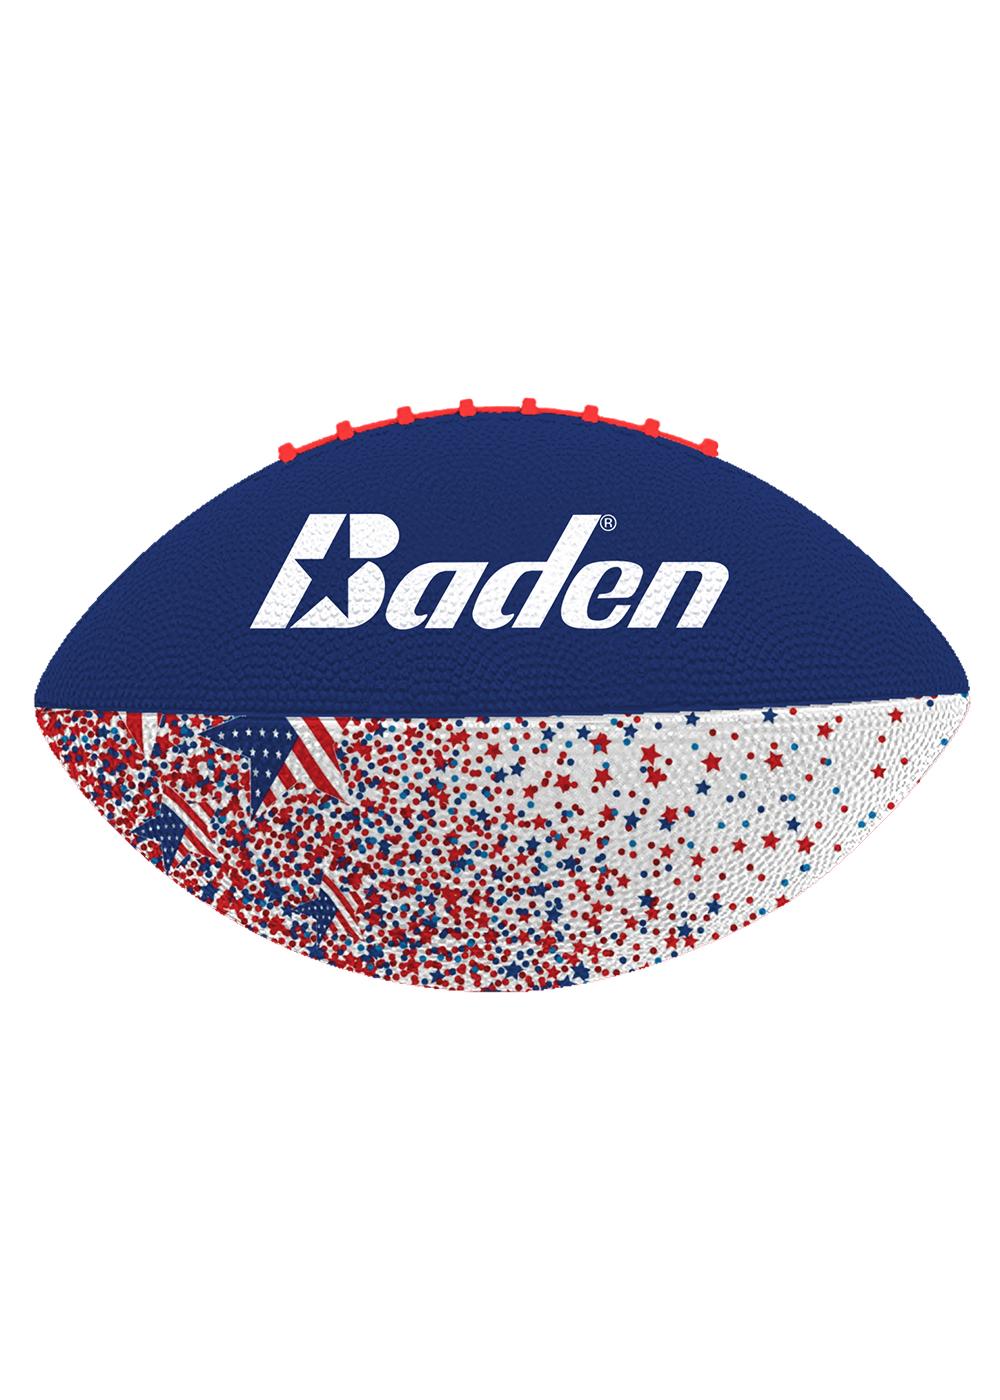 BADEN USA Official Size Rubber Football; image 1 of 3